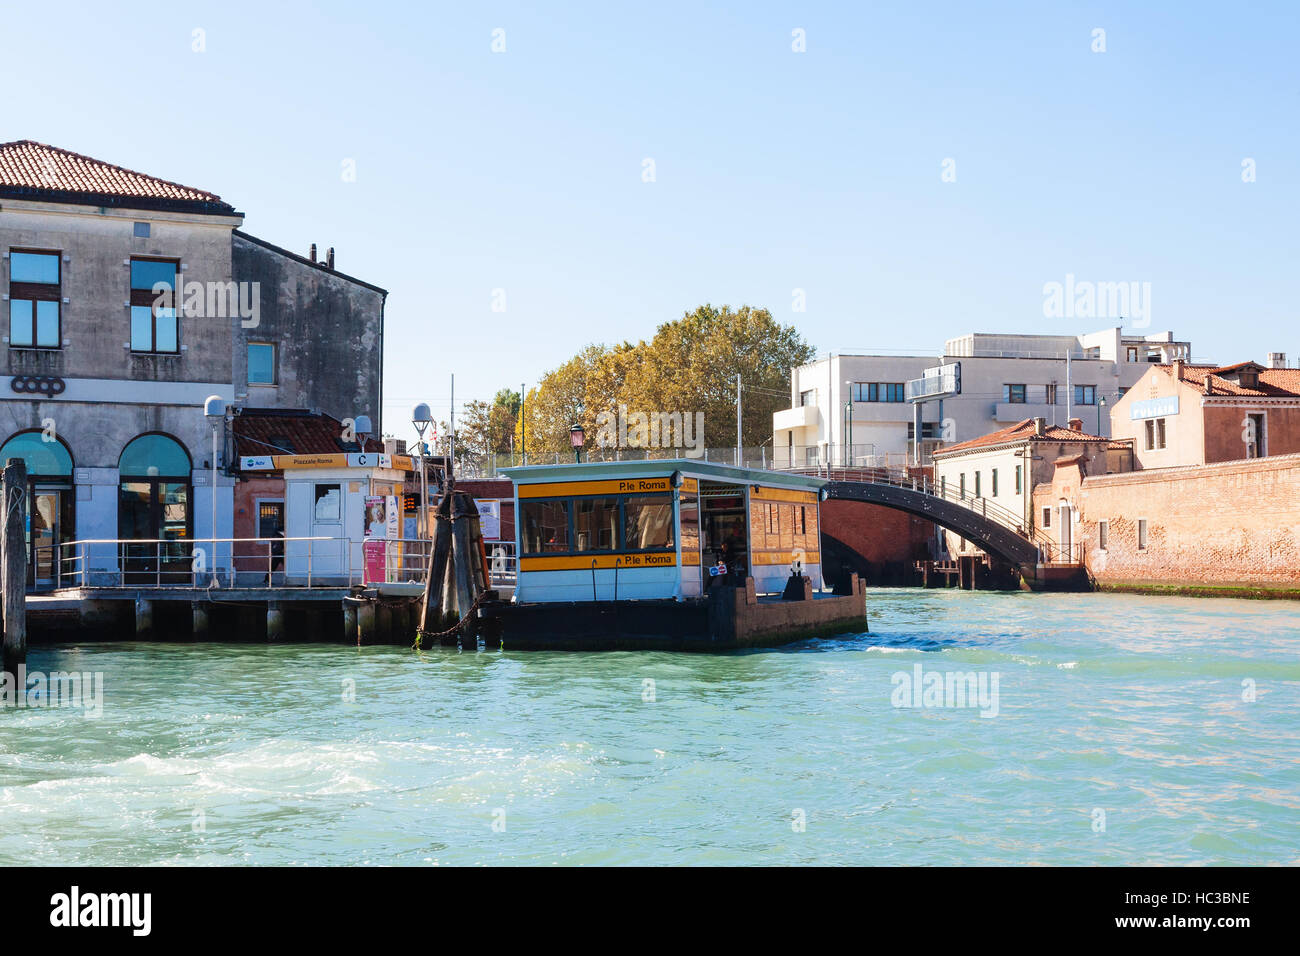 VENICE, ITALY - OCTOBER 12, 2016: Piazzale Roma vaporetto water bus stops on the Grand Canal in Venice. The square acts as the main bus station for Ve Stock Photo